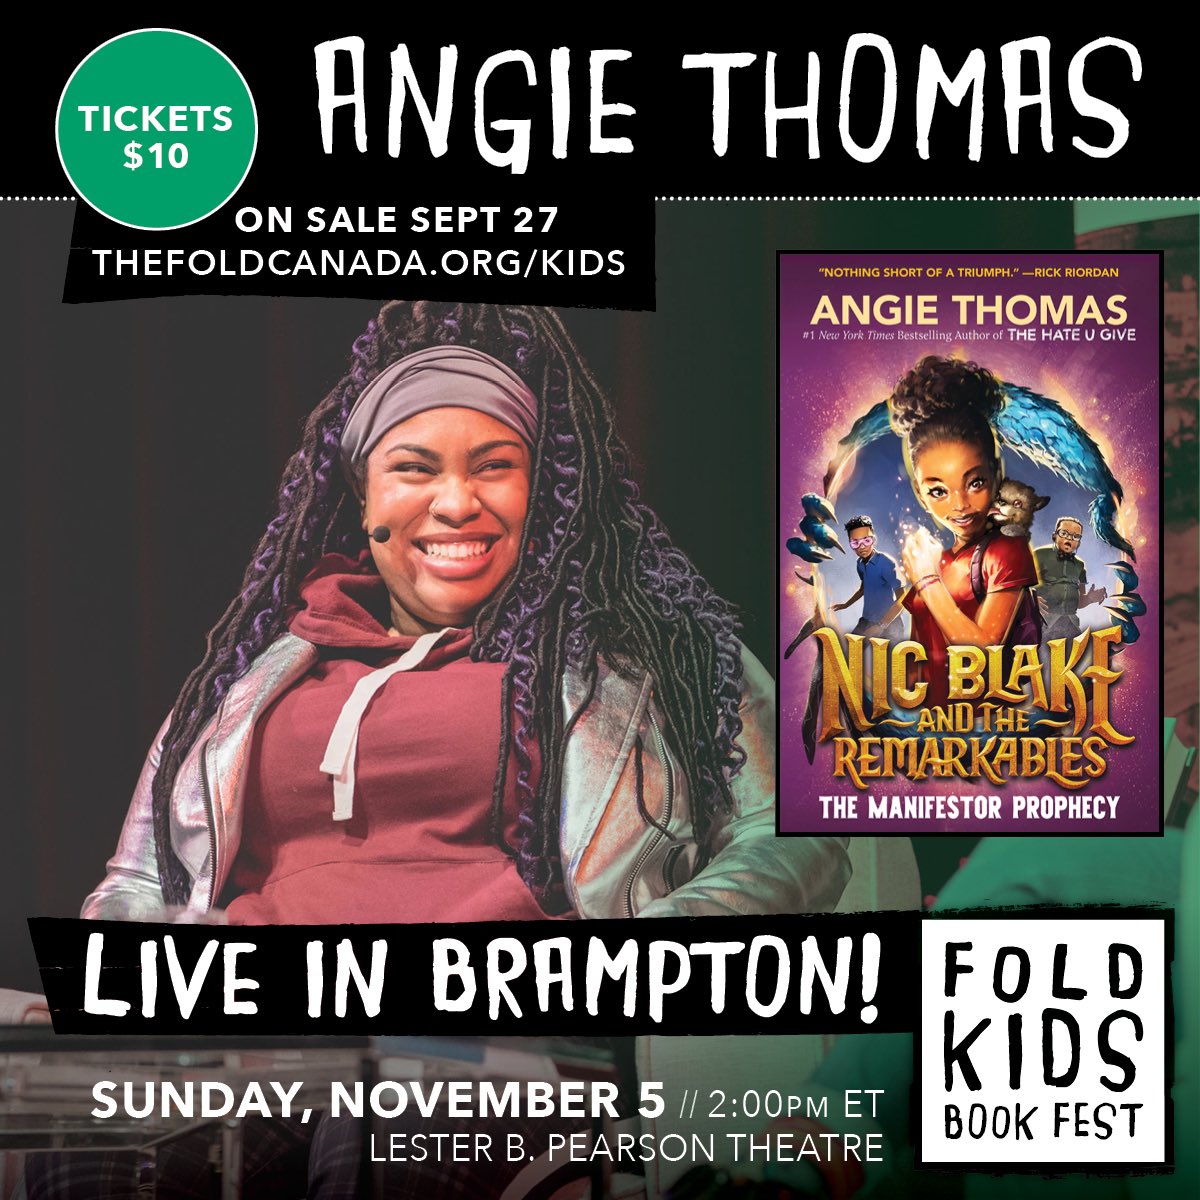 Tickets for @angiecthomas Live at FOLD Kids Book Fest are now on sale! eventbrite.com/e/713997113587